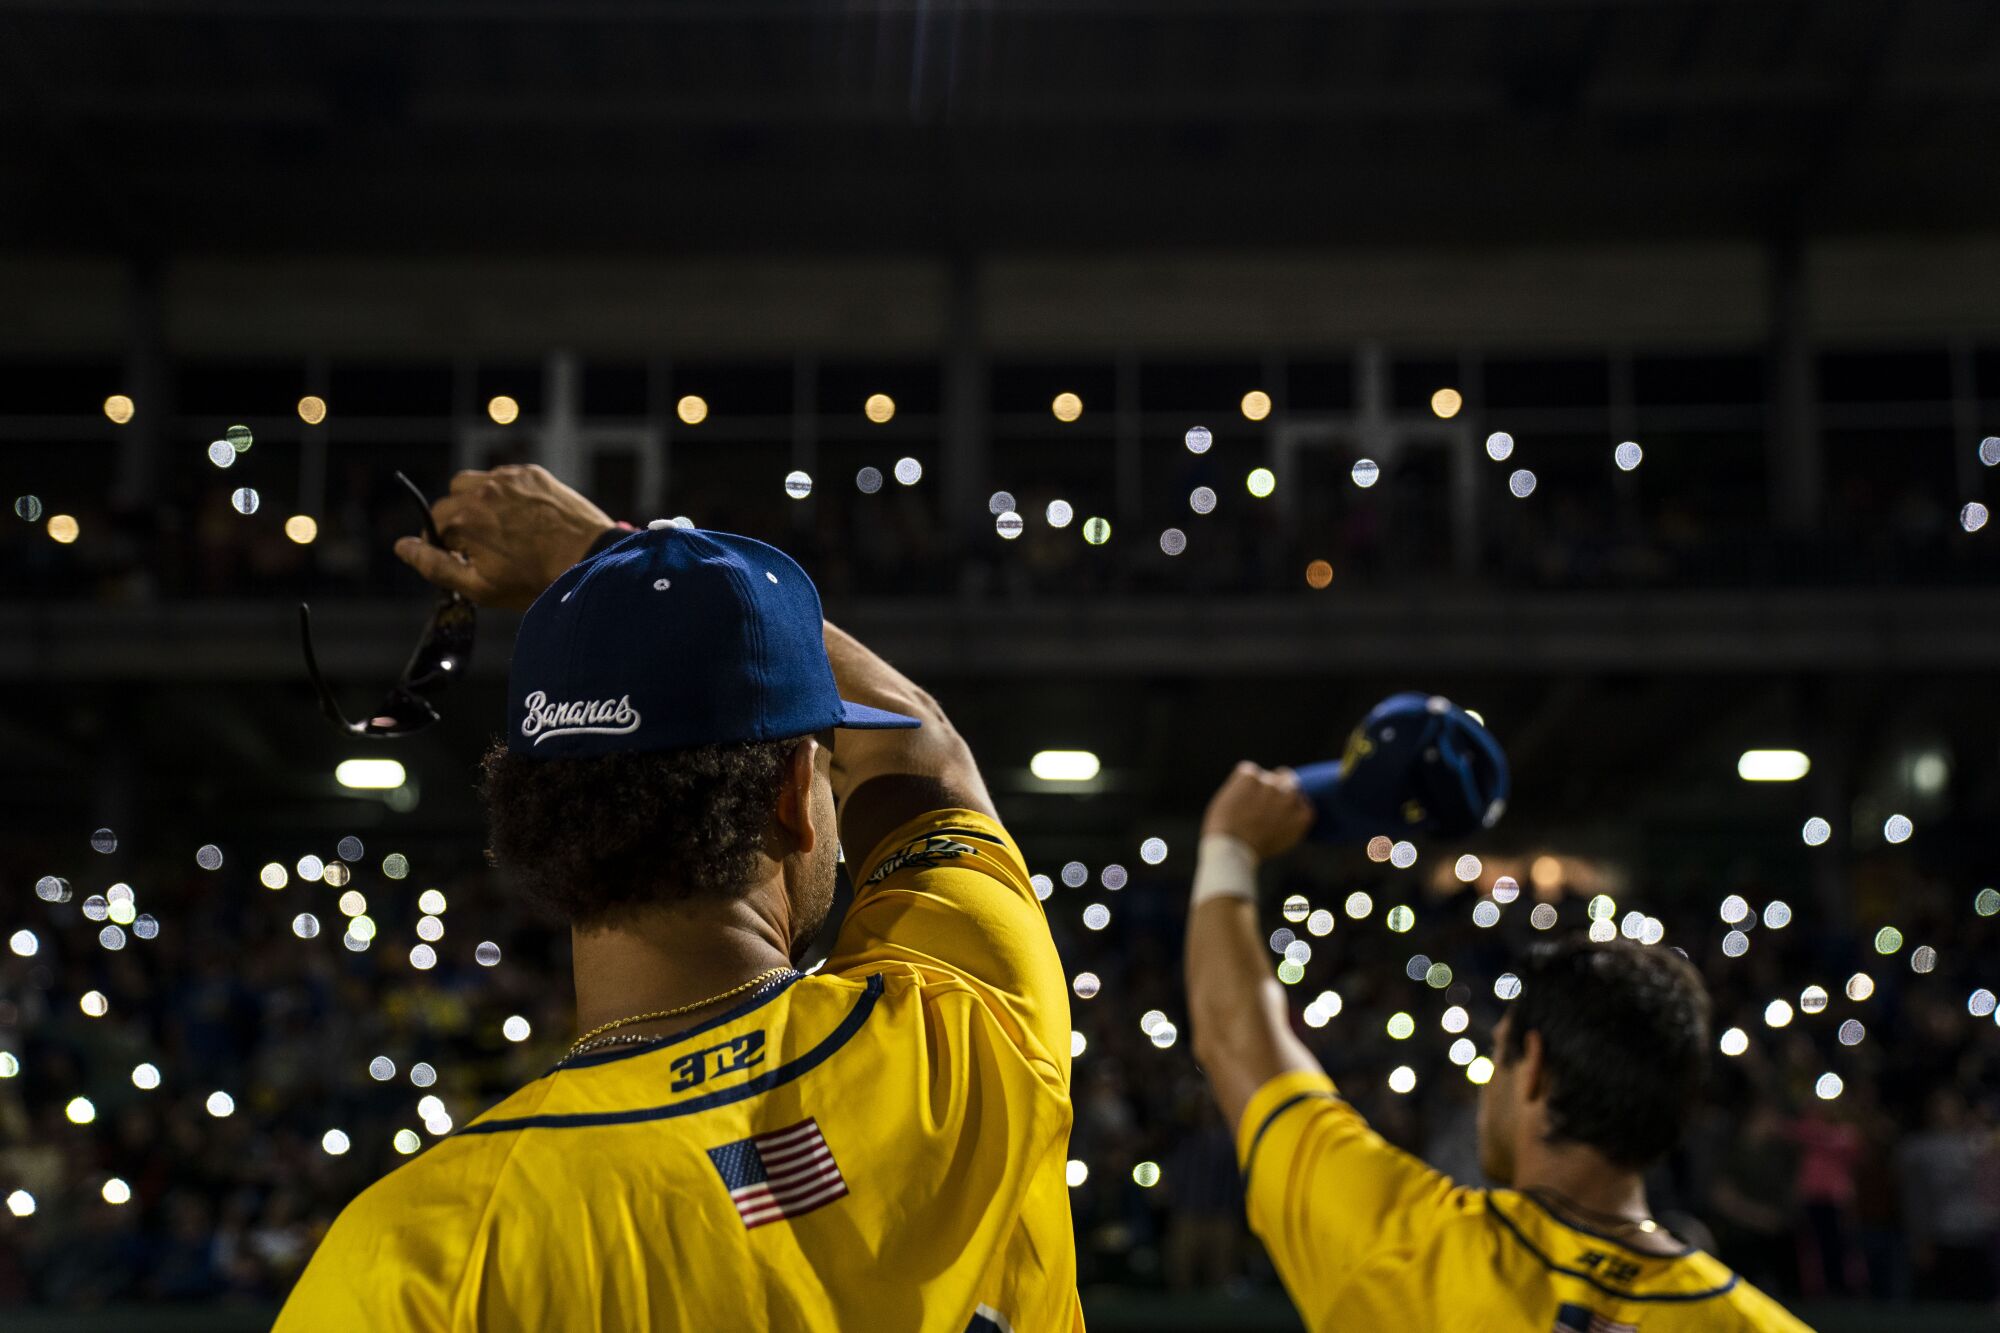 During the seventh inning, Savannah Bananas fans wave their cellphones during the playing of Coldplay's "Yellow."